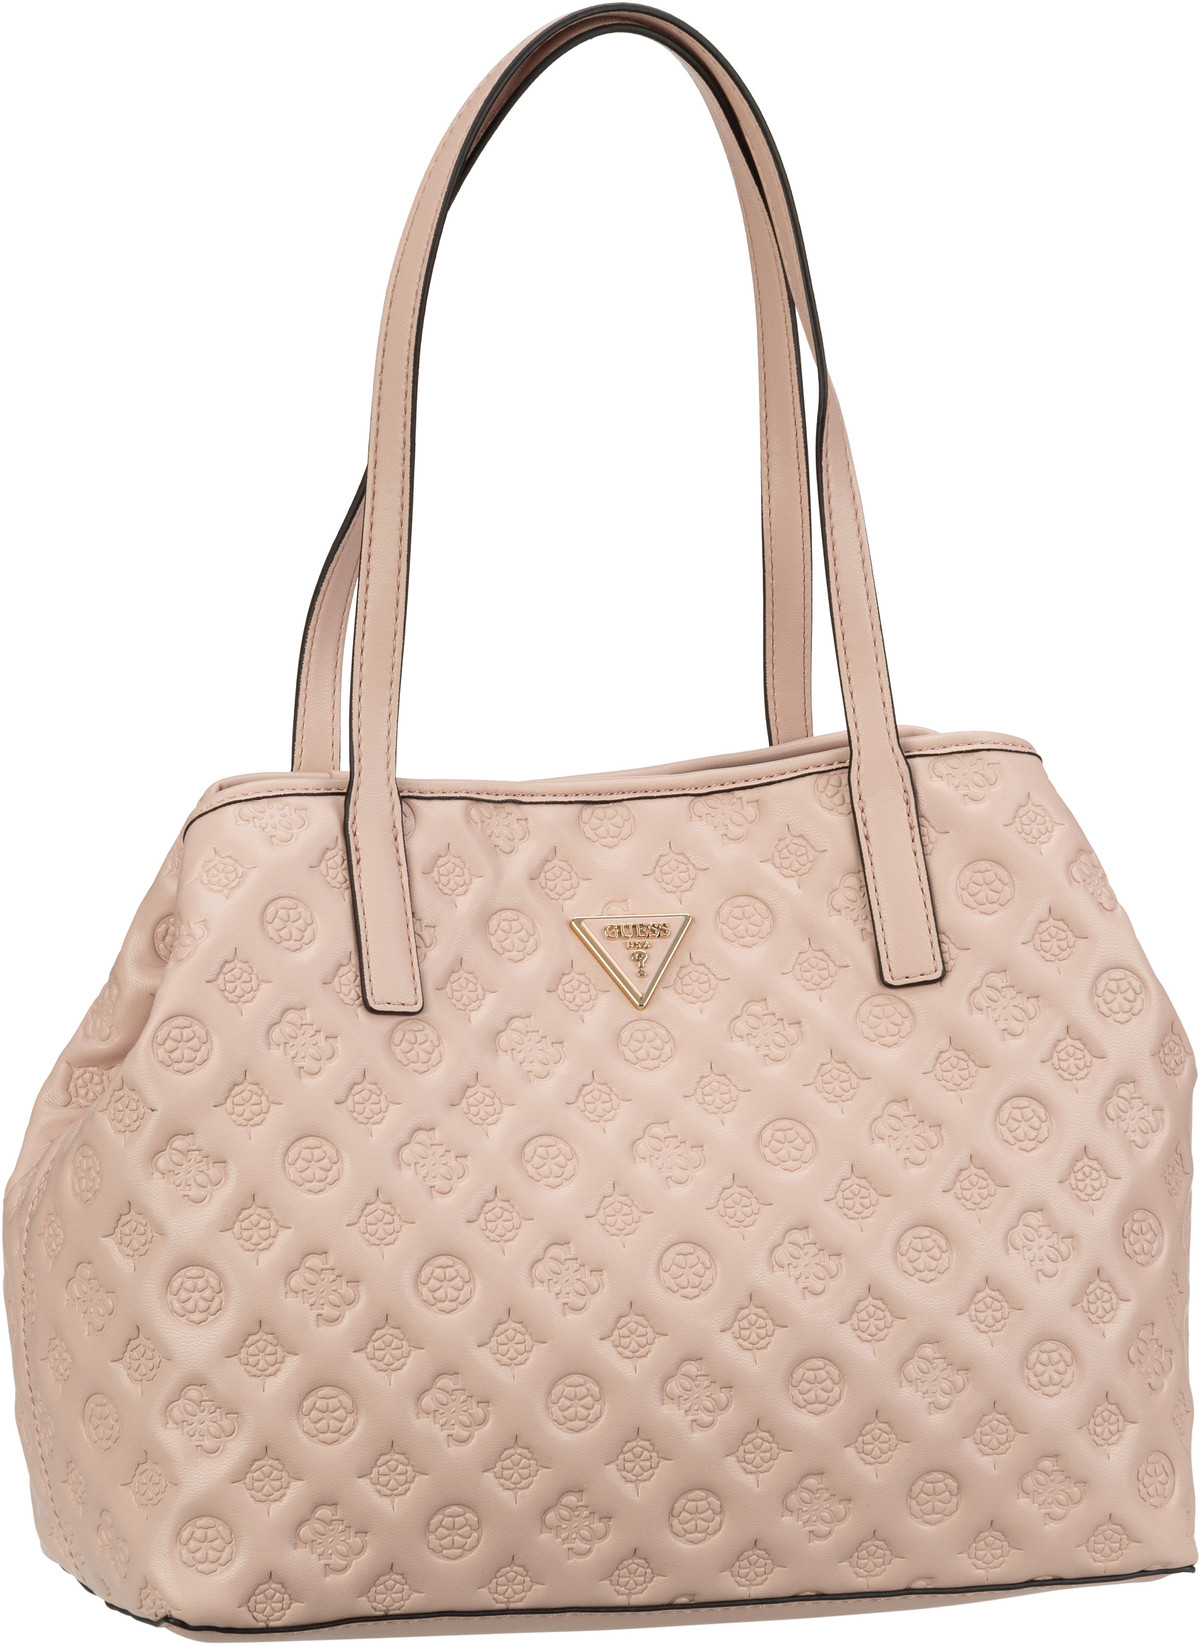 Guess Vikky Tote LF - Pale Rose